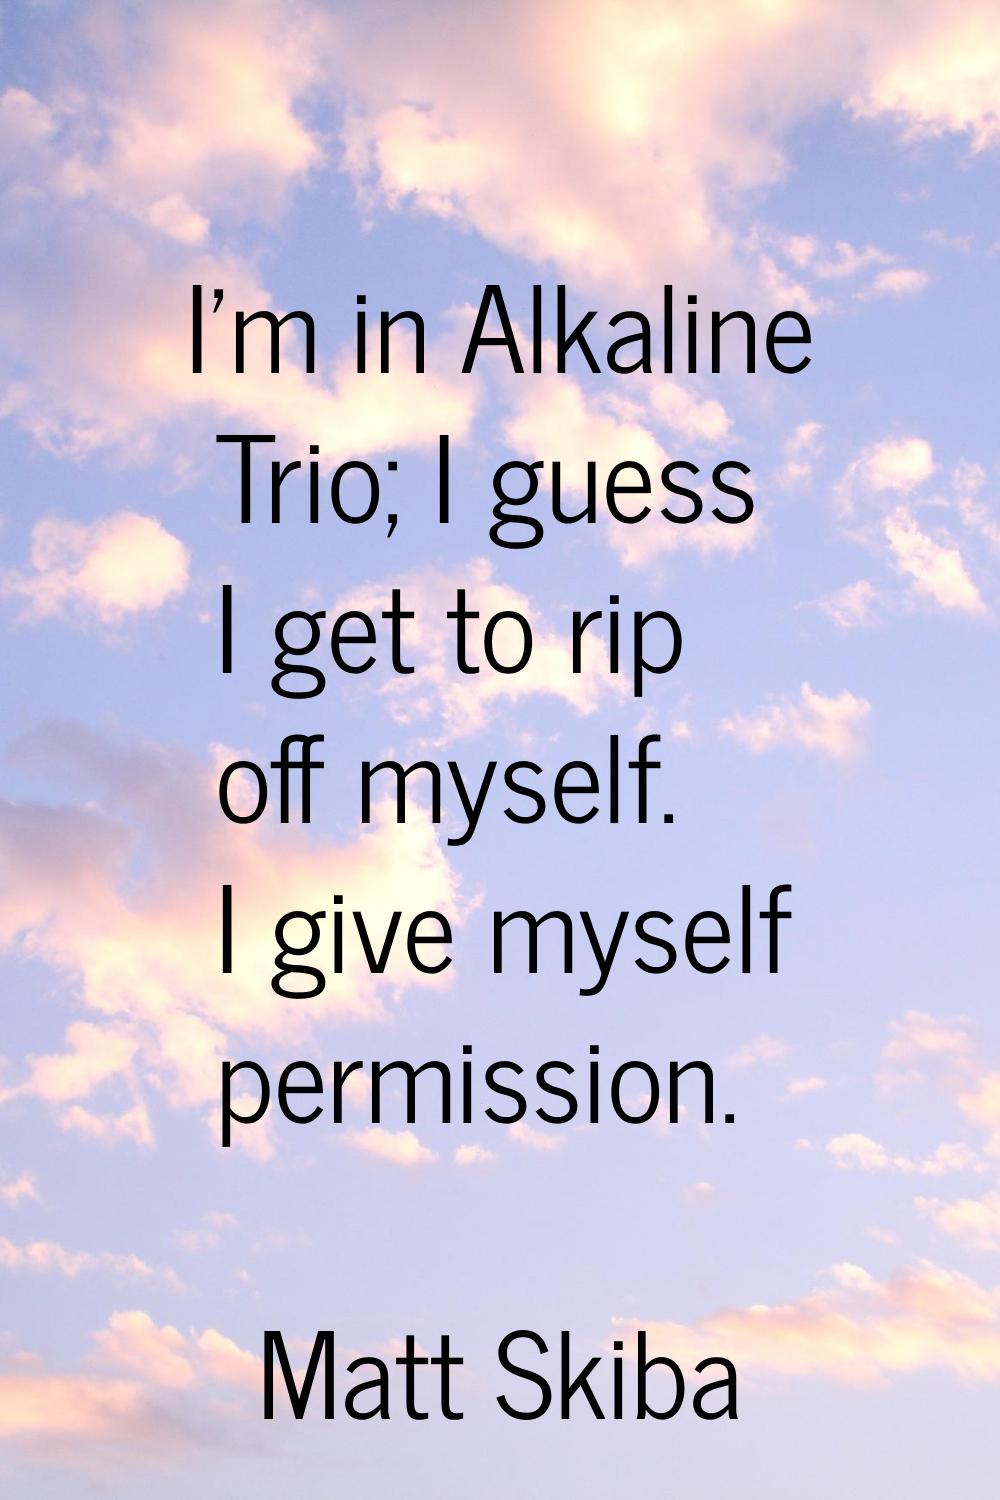 I'm in Alkaline Trio; I guess I get to rip off myself. I give myself permission.